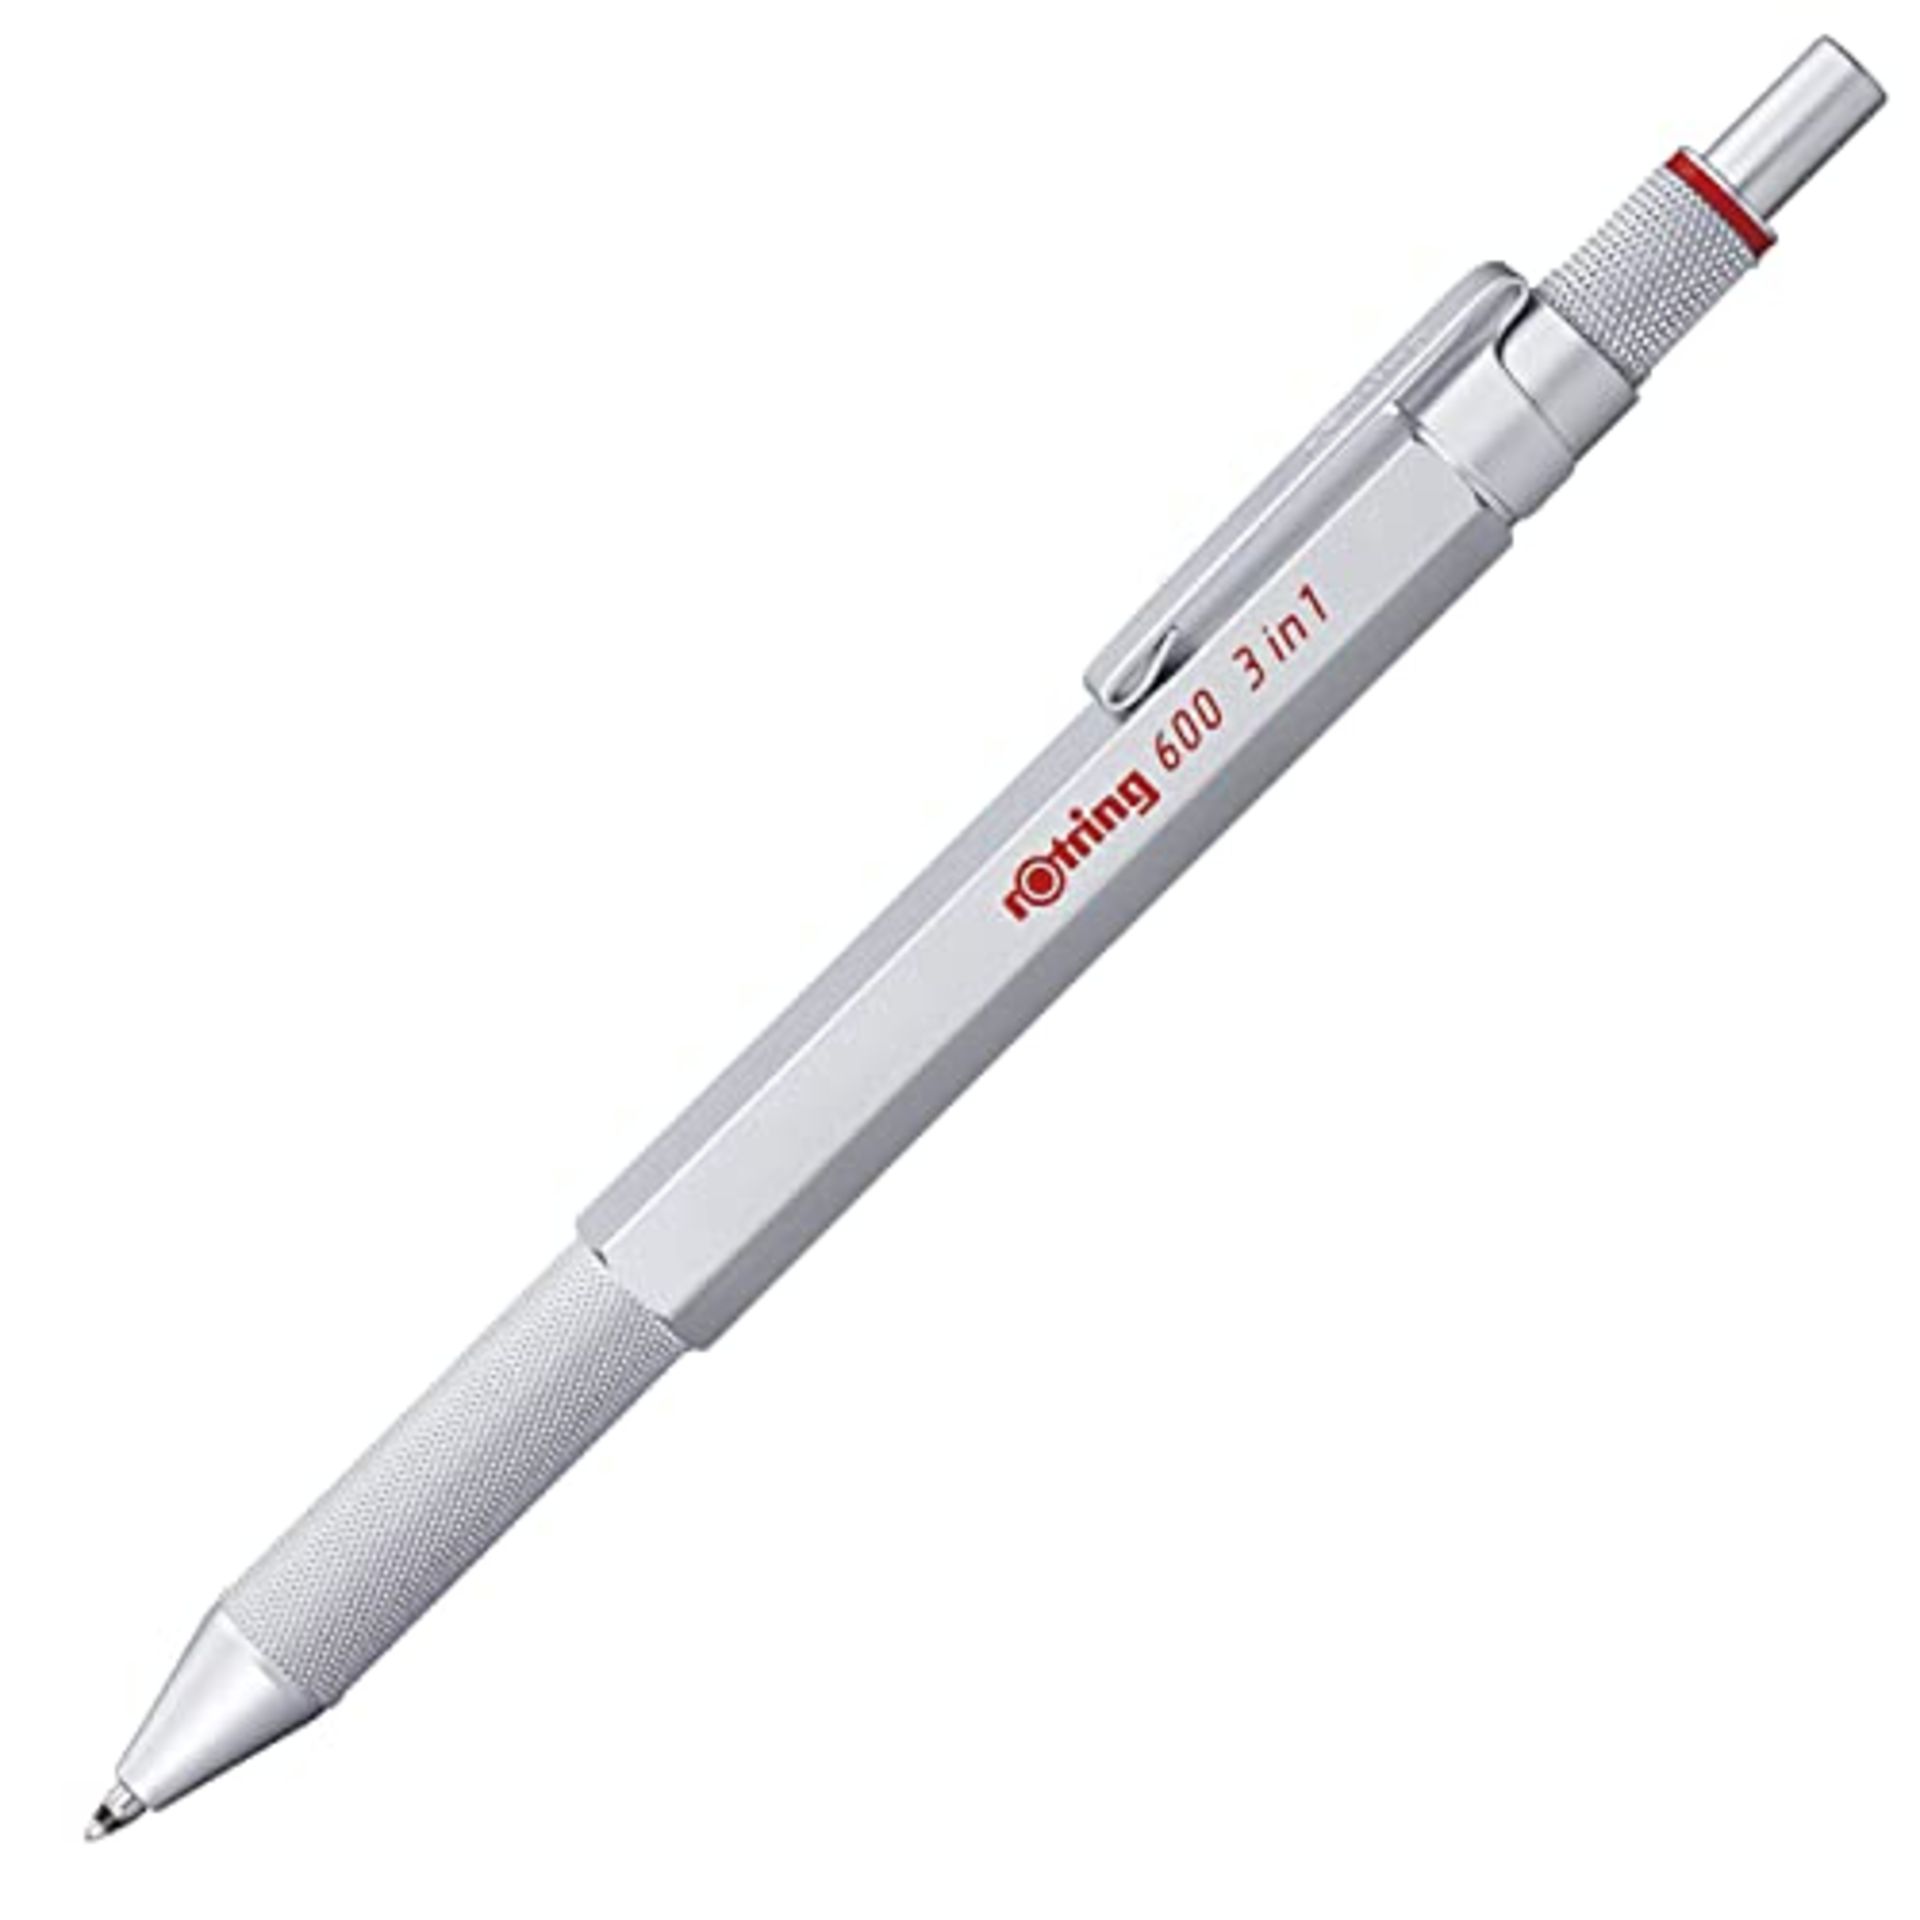 rOtring 600 Multi-color Pen and 3-in-1 Pencil | 2 fine ballpoint tips (black and red i - Bild 4 aus 6